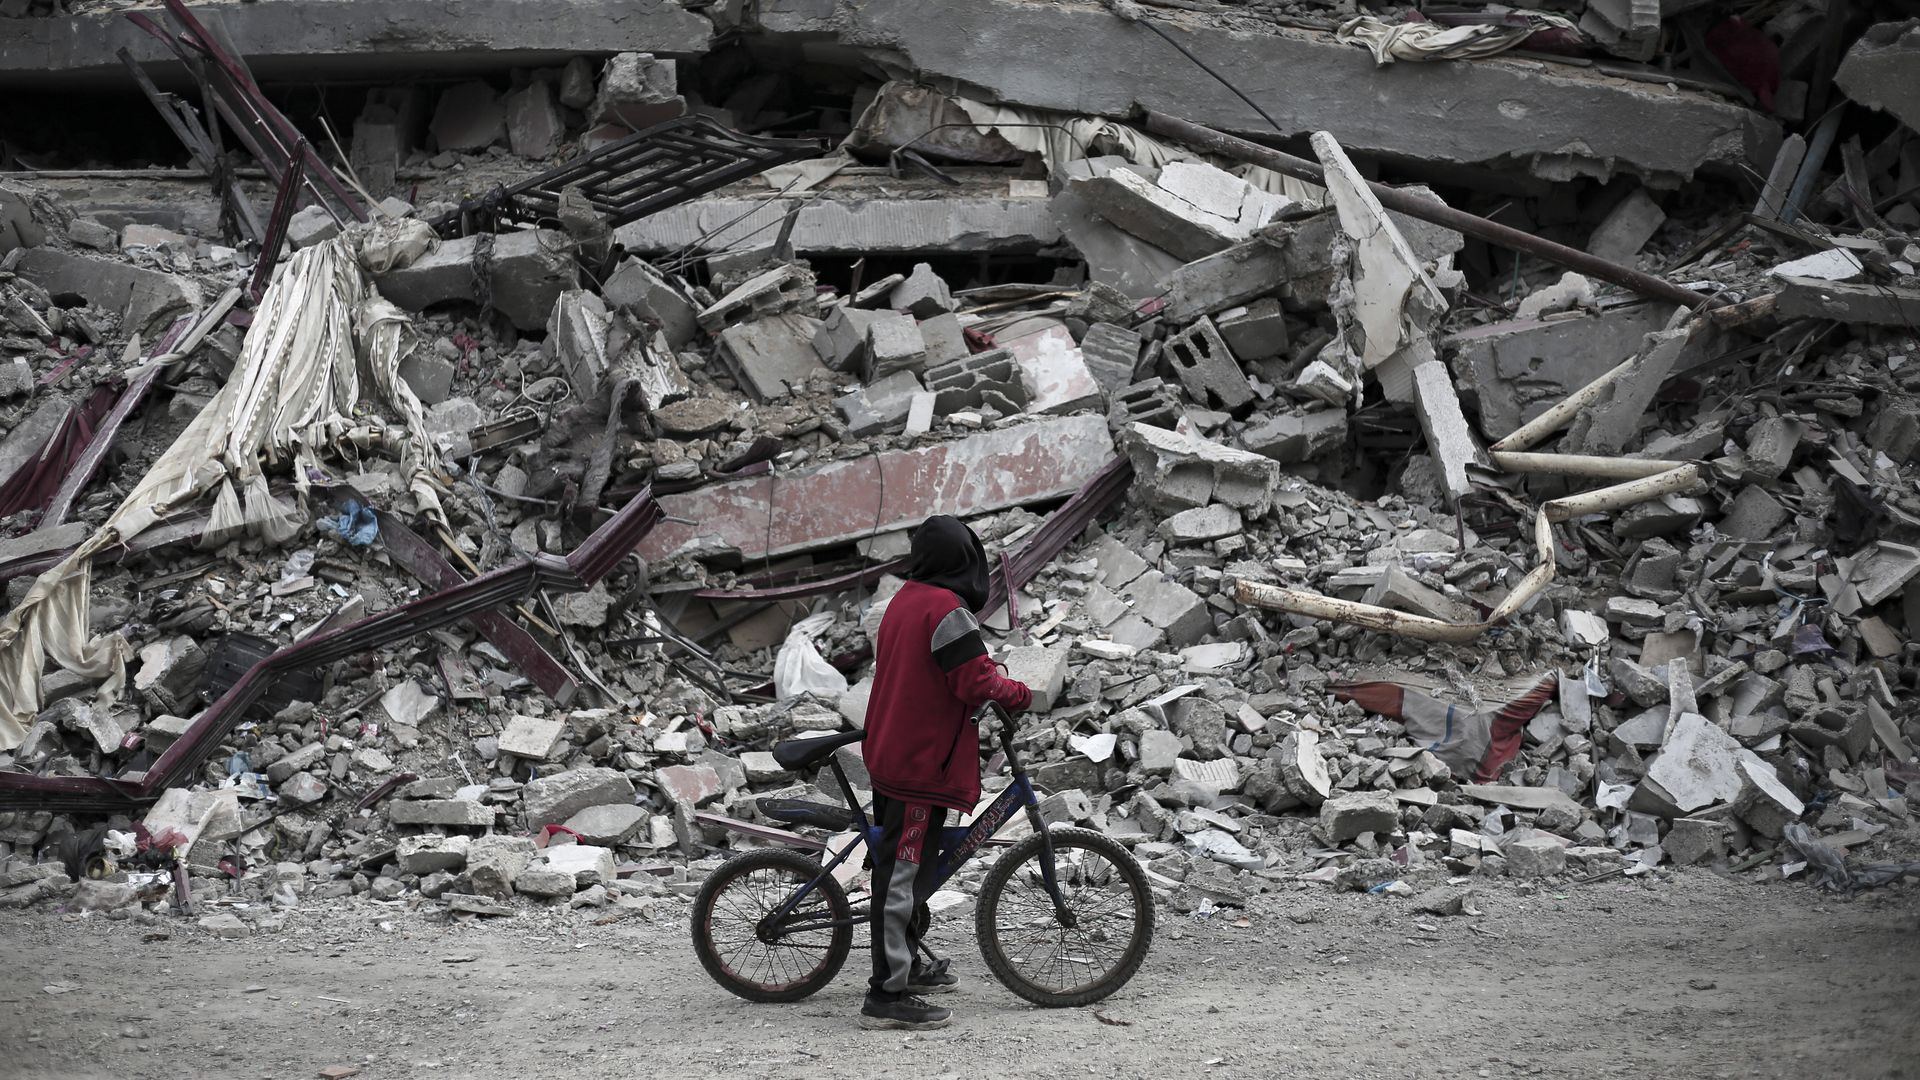 A Palestinian boy along with his bicycle looks at the rubble of a house destroyed by Israeli bombardment in Rafah